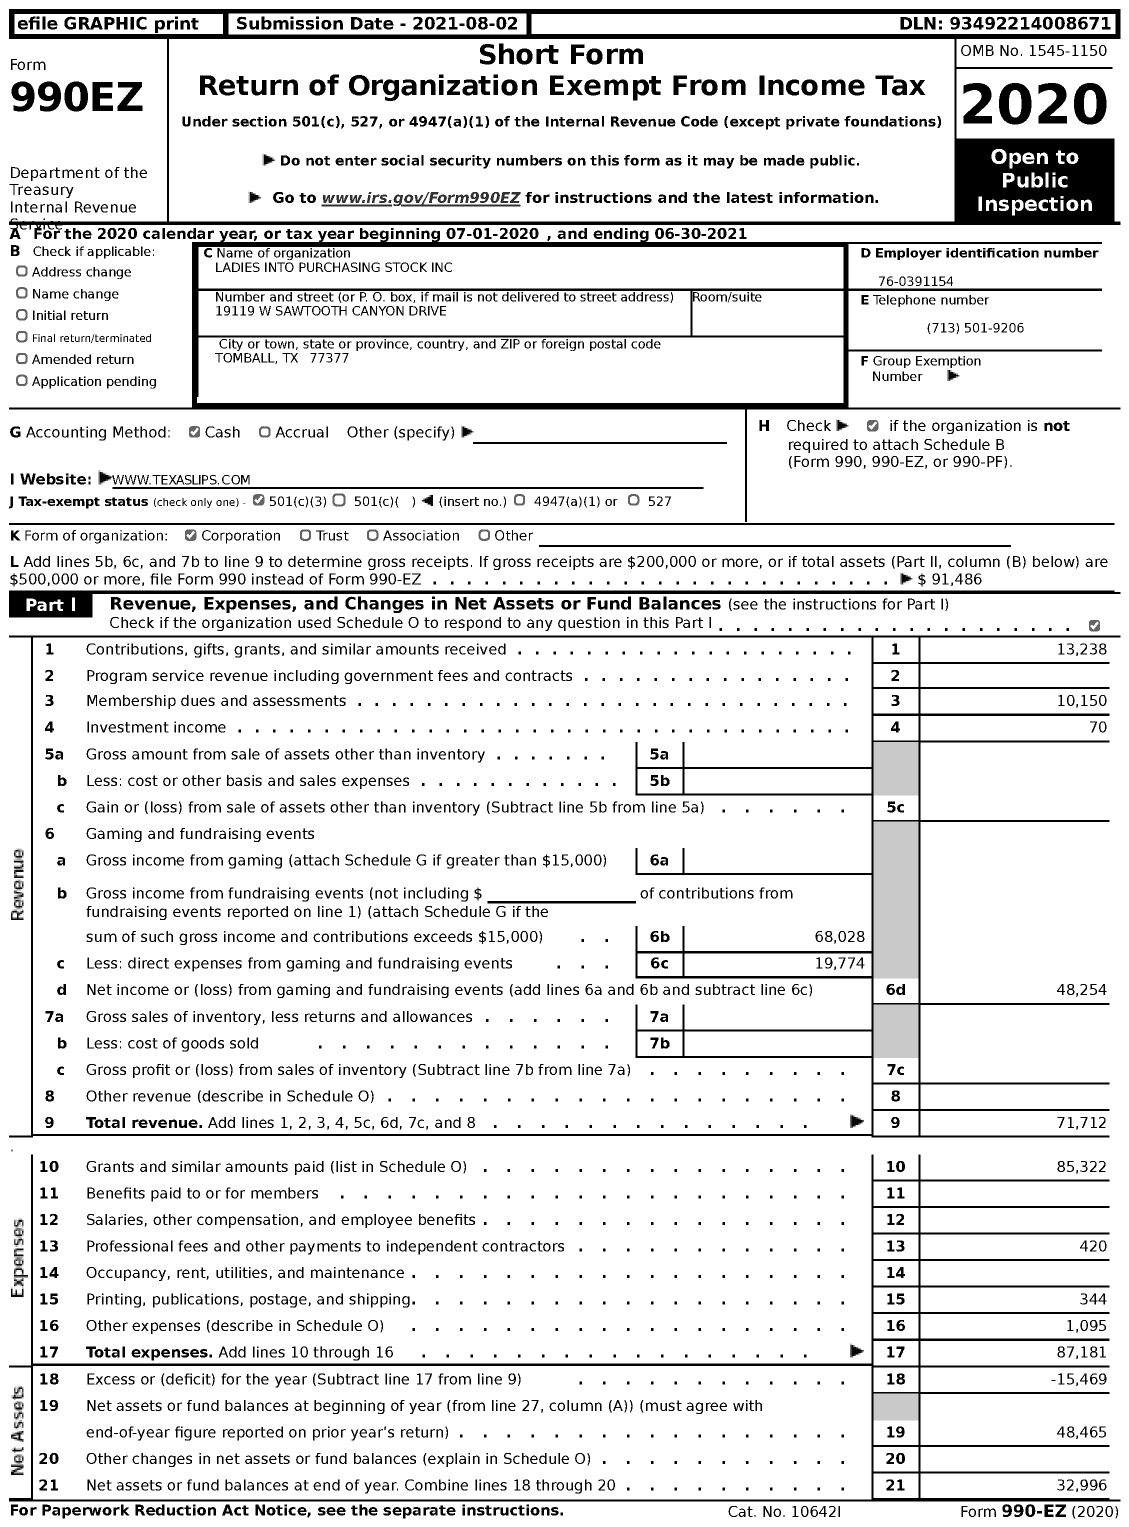 Image of first page of 2020 Form 990EZ for Ladies Into Purchasing Stock